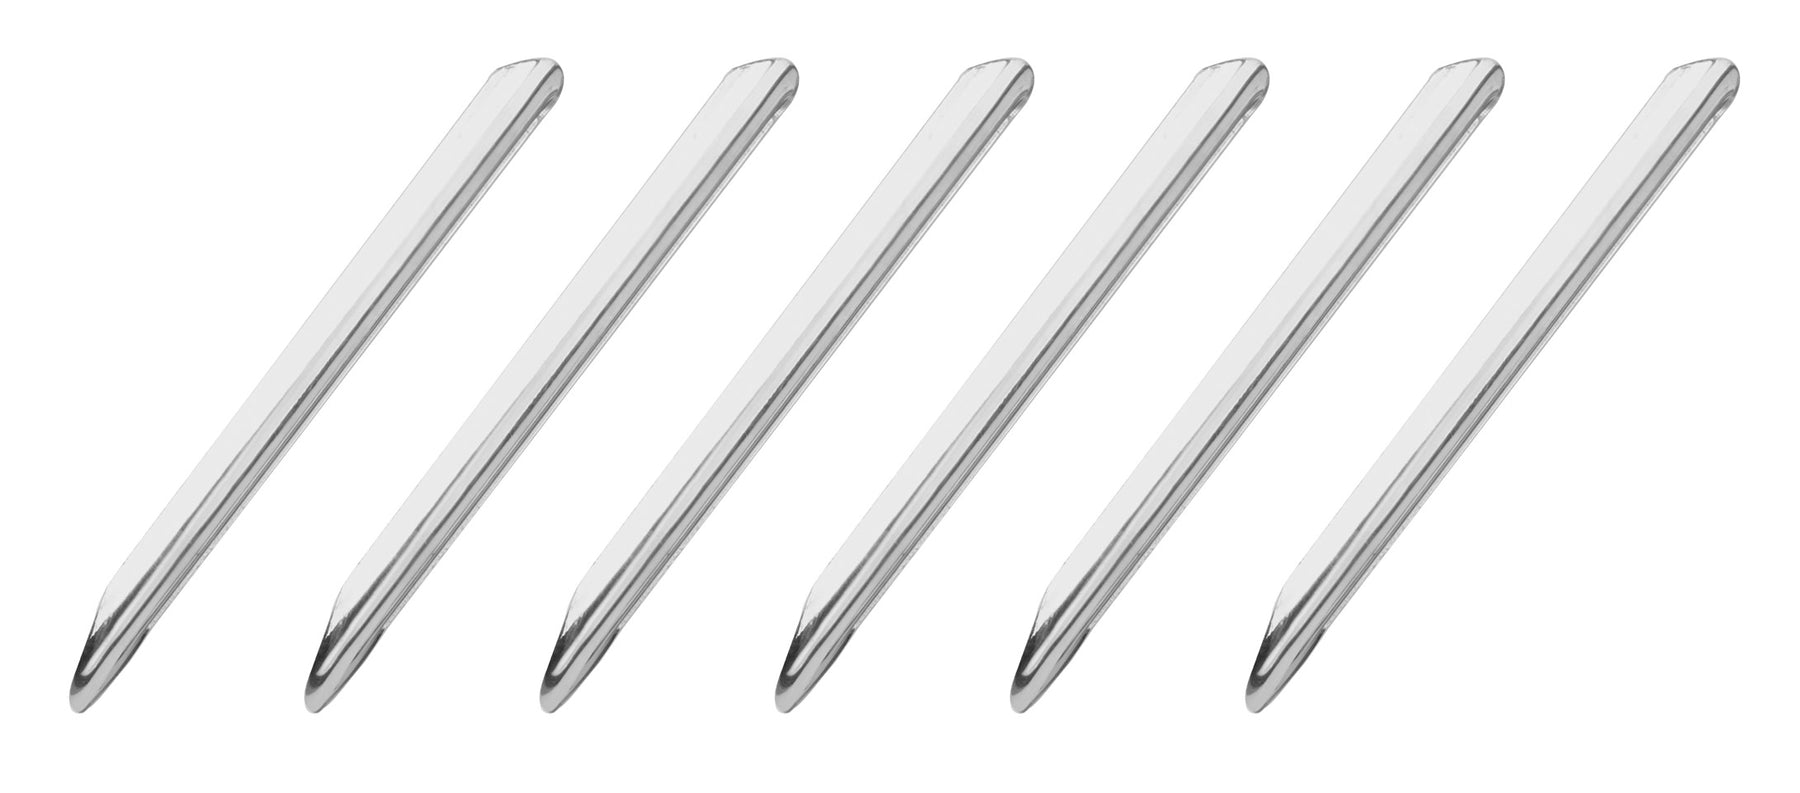 6PK Spatula Scoops, 6.3" - Stainless Steel - Rounded / Pointed End